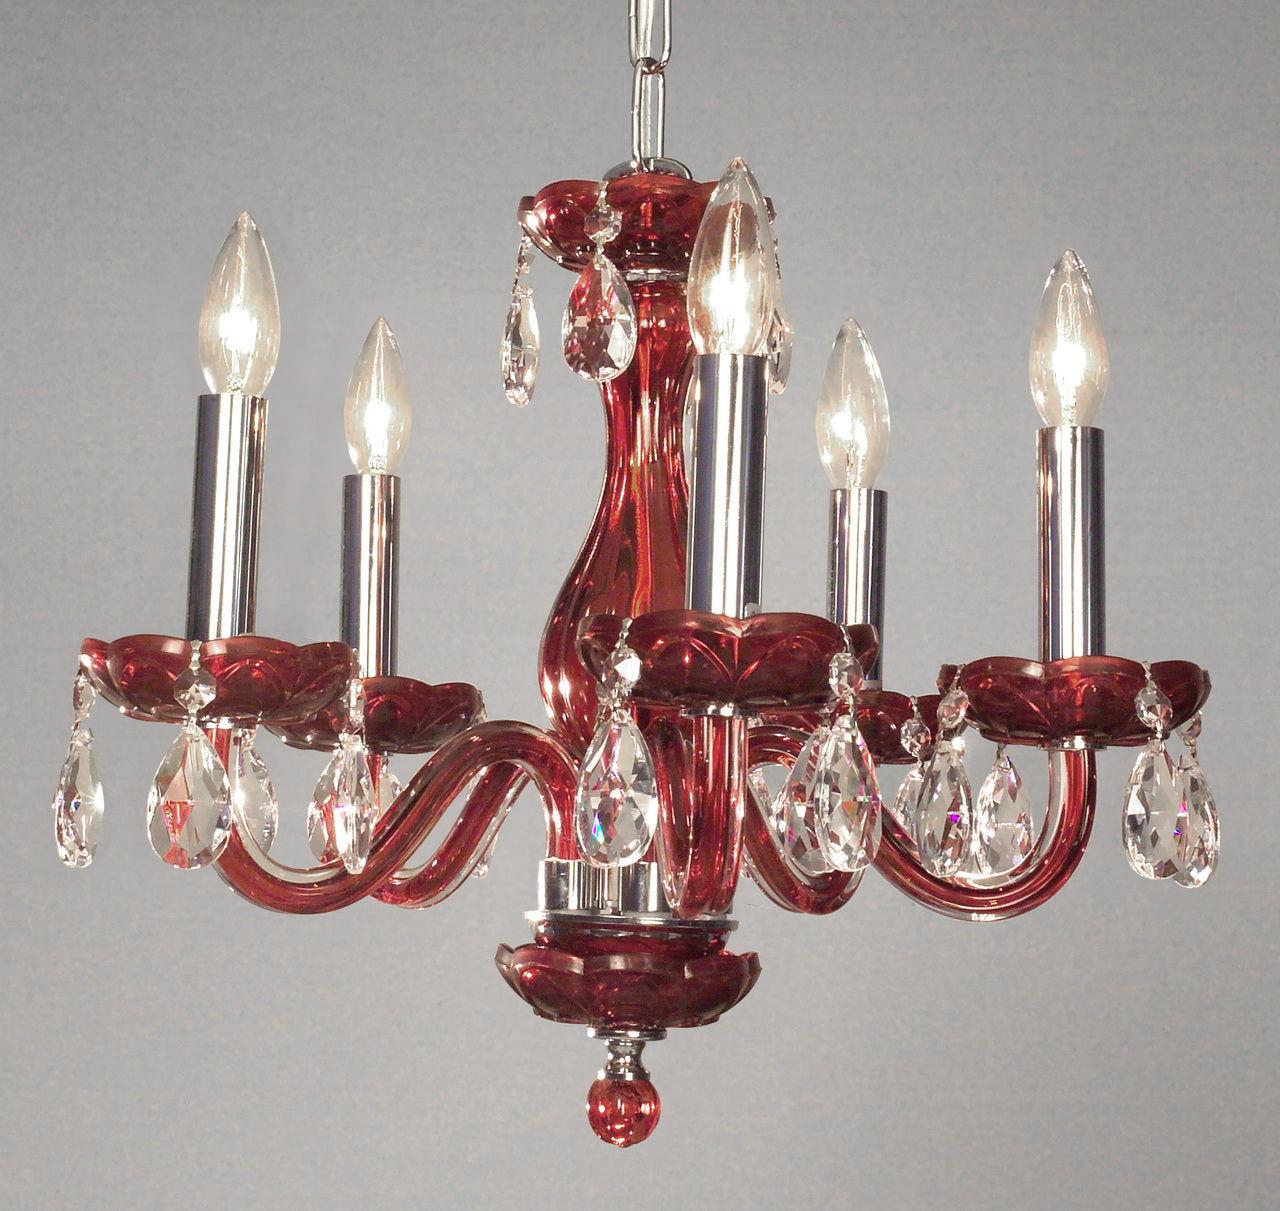 Classic Lighting 82045 RED CPPR Monaco Crystal Chandelier in Red (Imported from Spain)